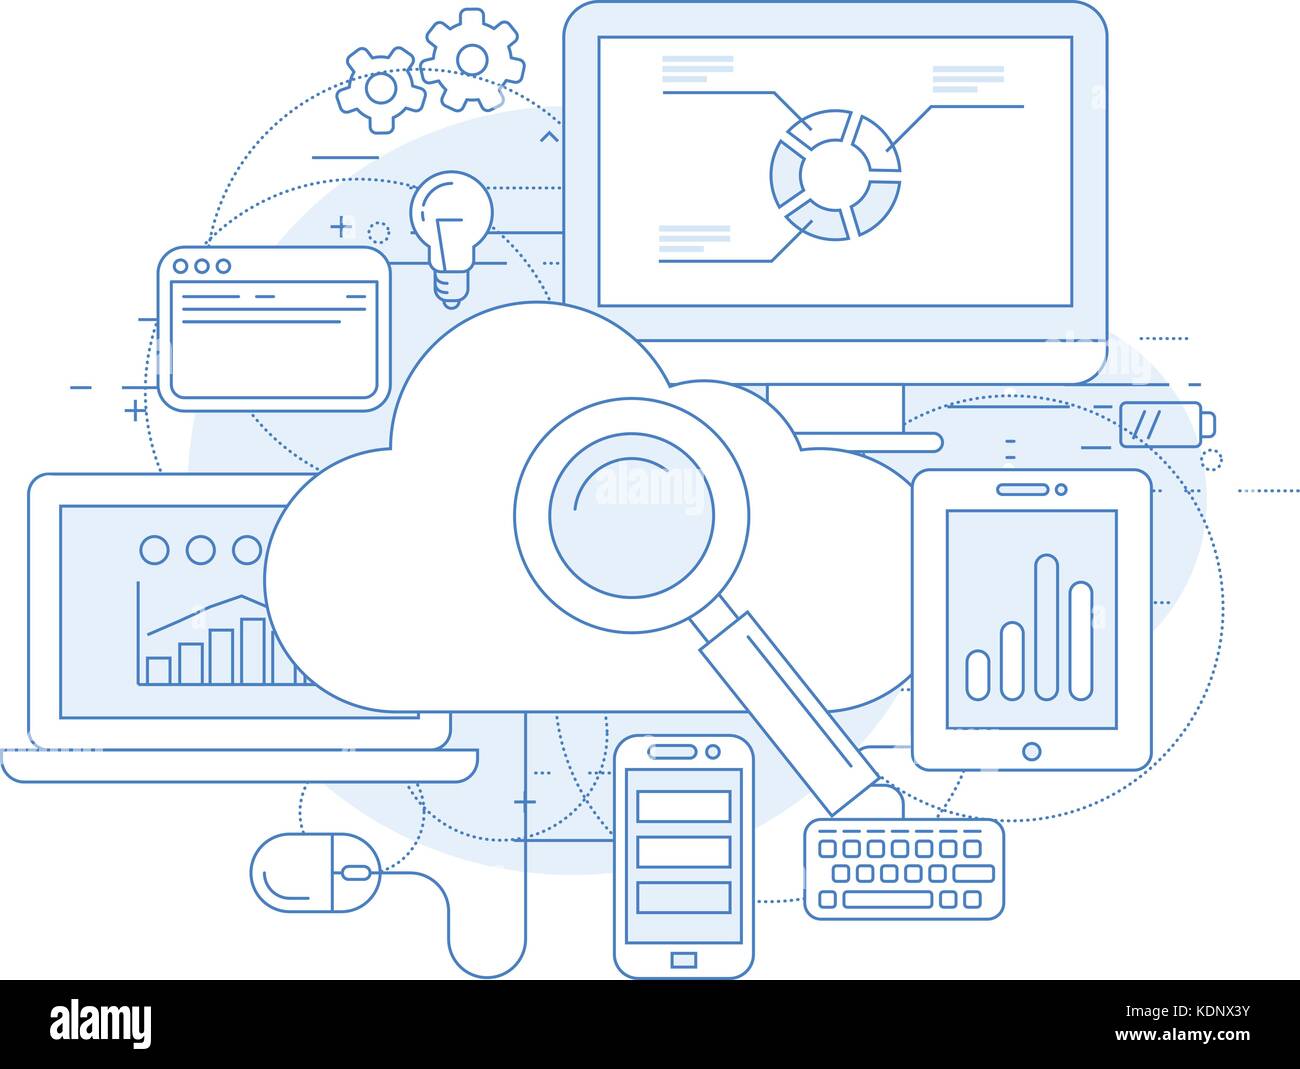 Cloud computing service and internet abstract design Stock Vector